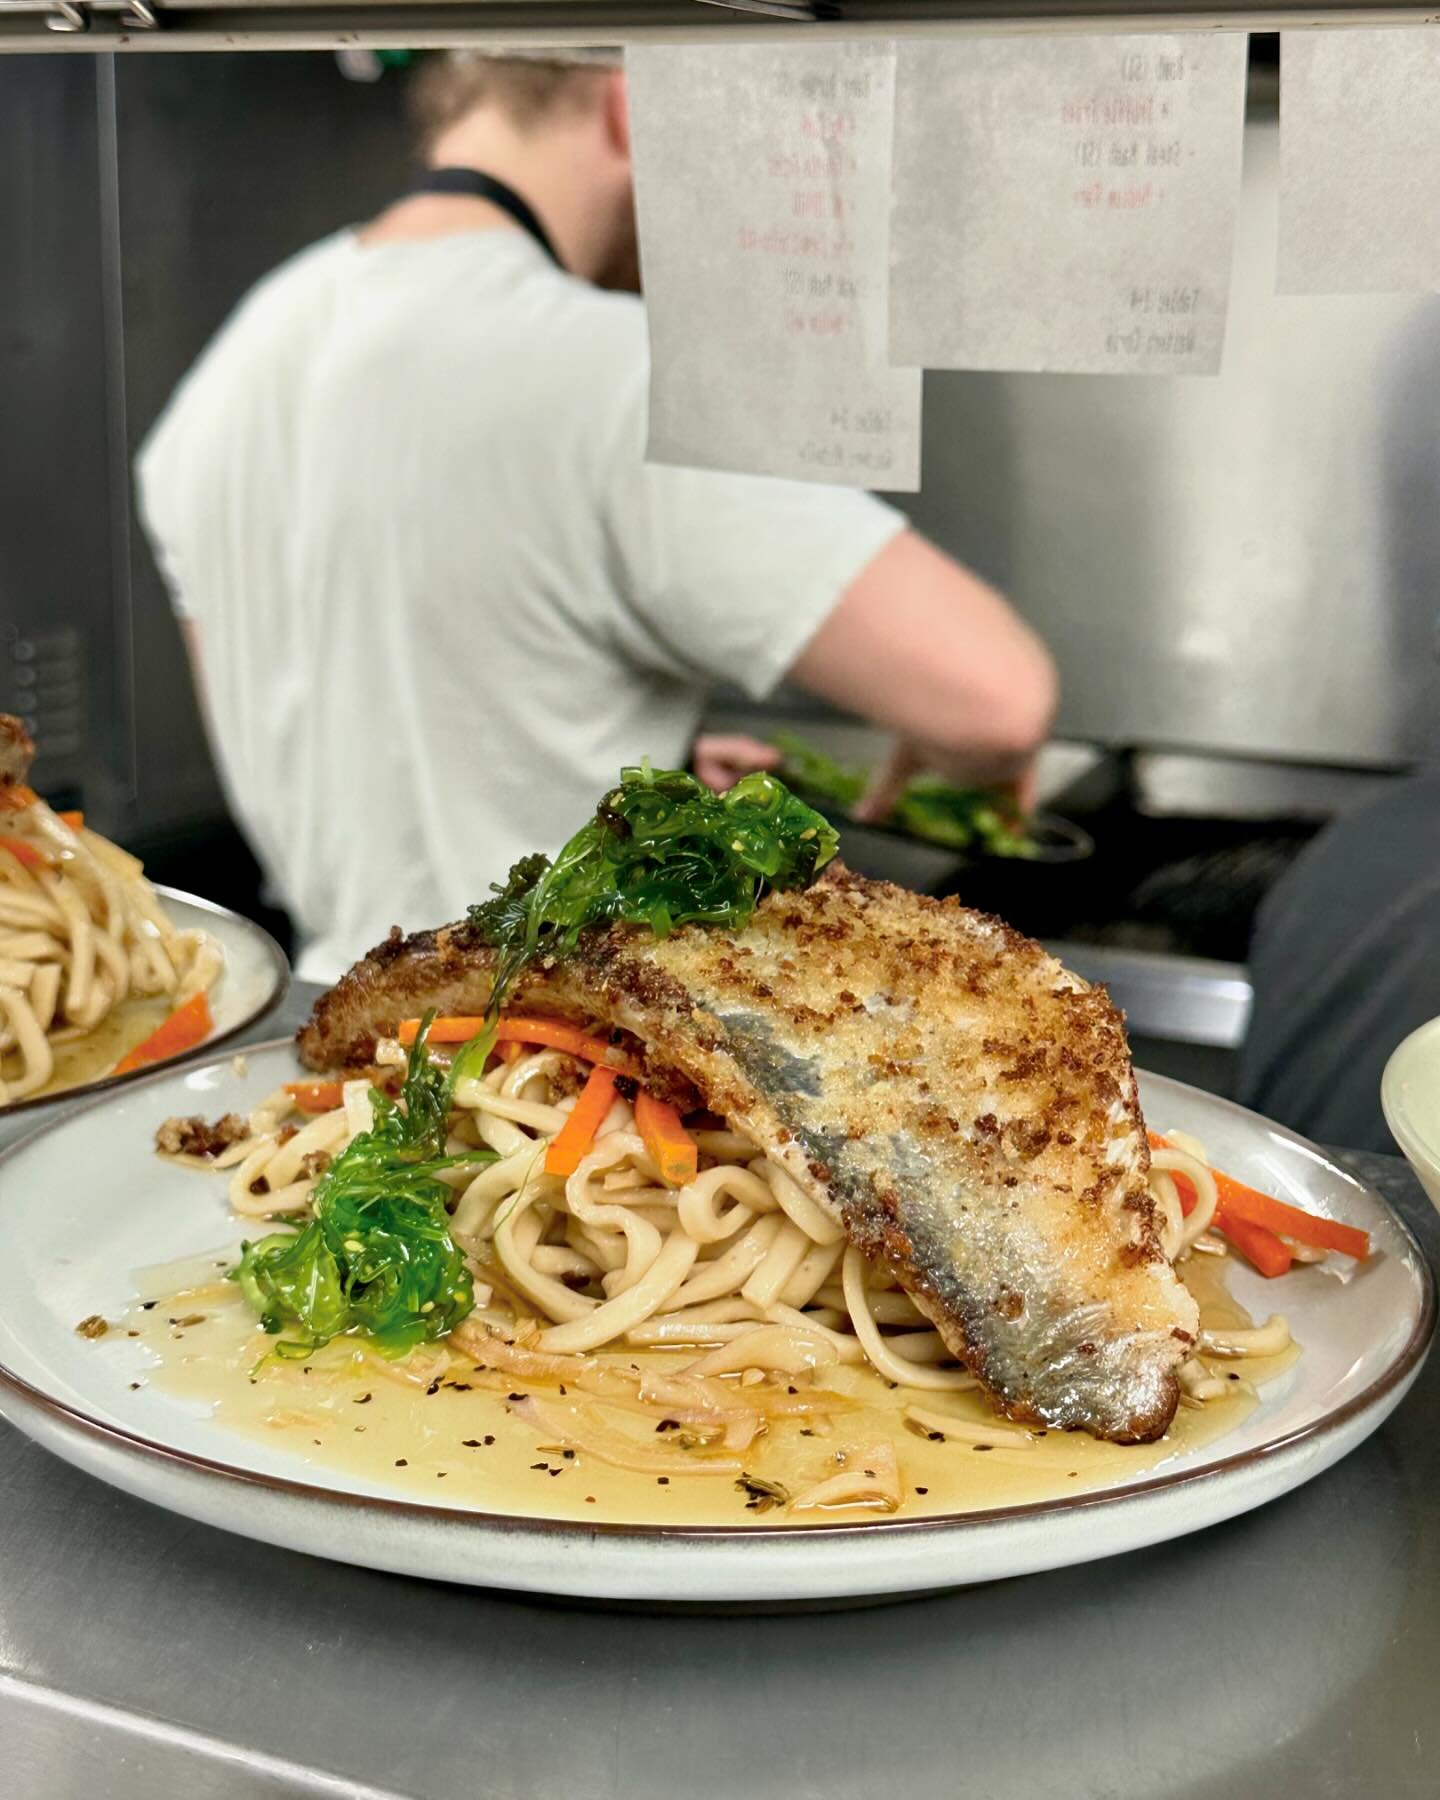 Friday April 12th Specials! 

🐟 Locally caught panko crusted Blue Fish filet over udon noodle salad with wakame and sweet &amp; sour Vietnamese sauce

🥩 Braised bone-in veal short ribs over roasted garlic kohlrabi puree with kohlrabi leaf &amp; fen